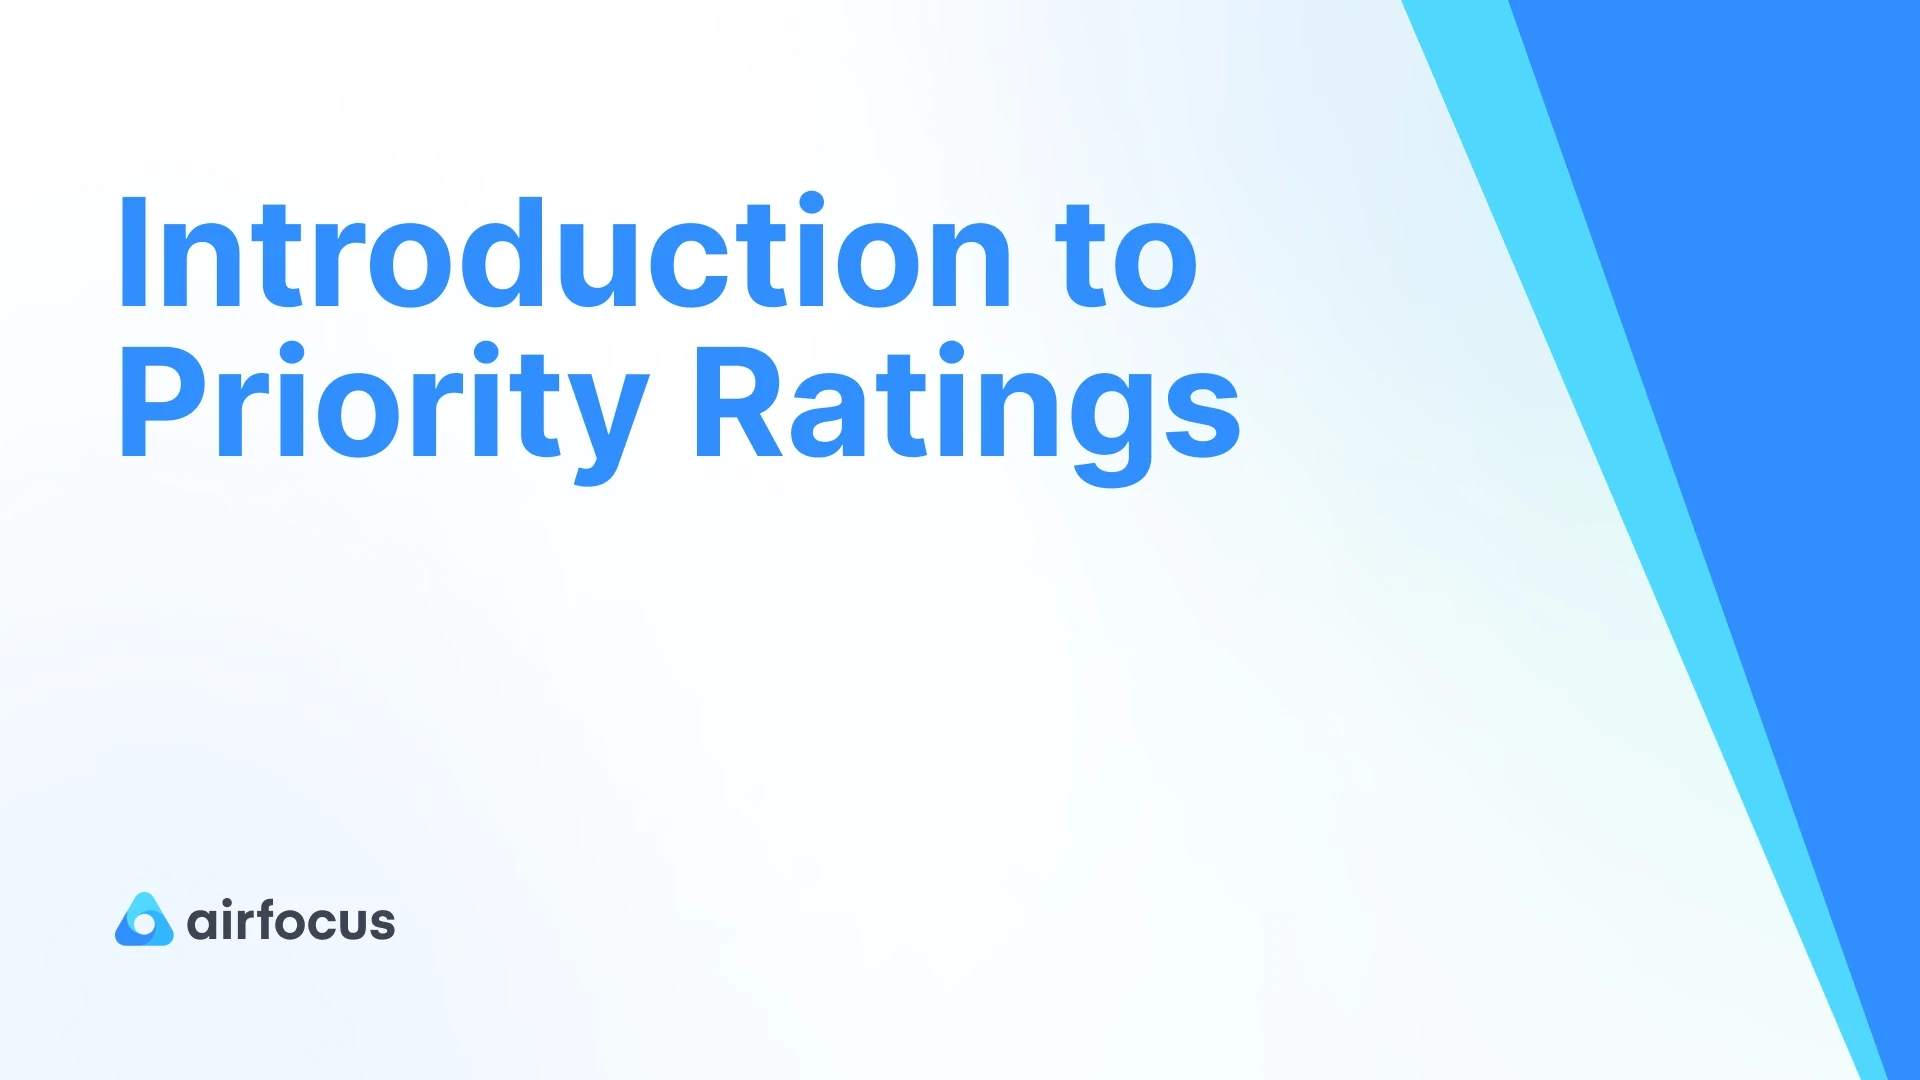 Introduction to Priority Ratings